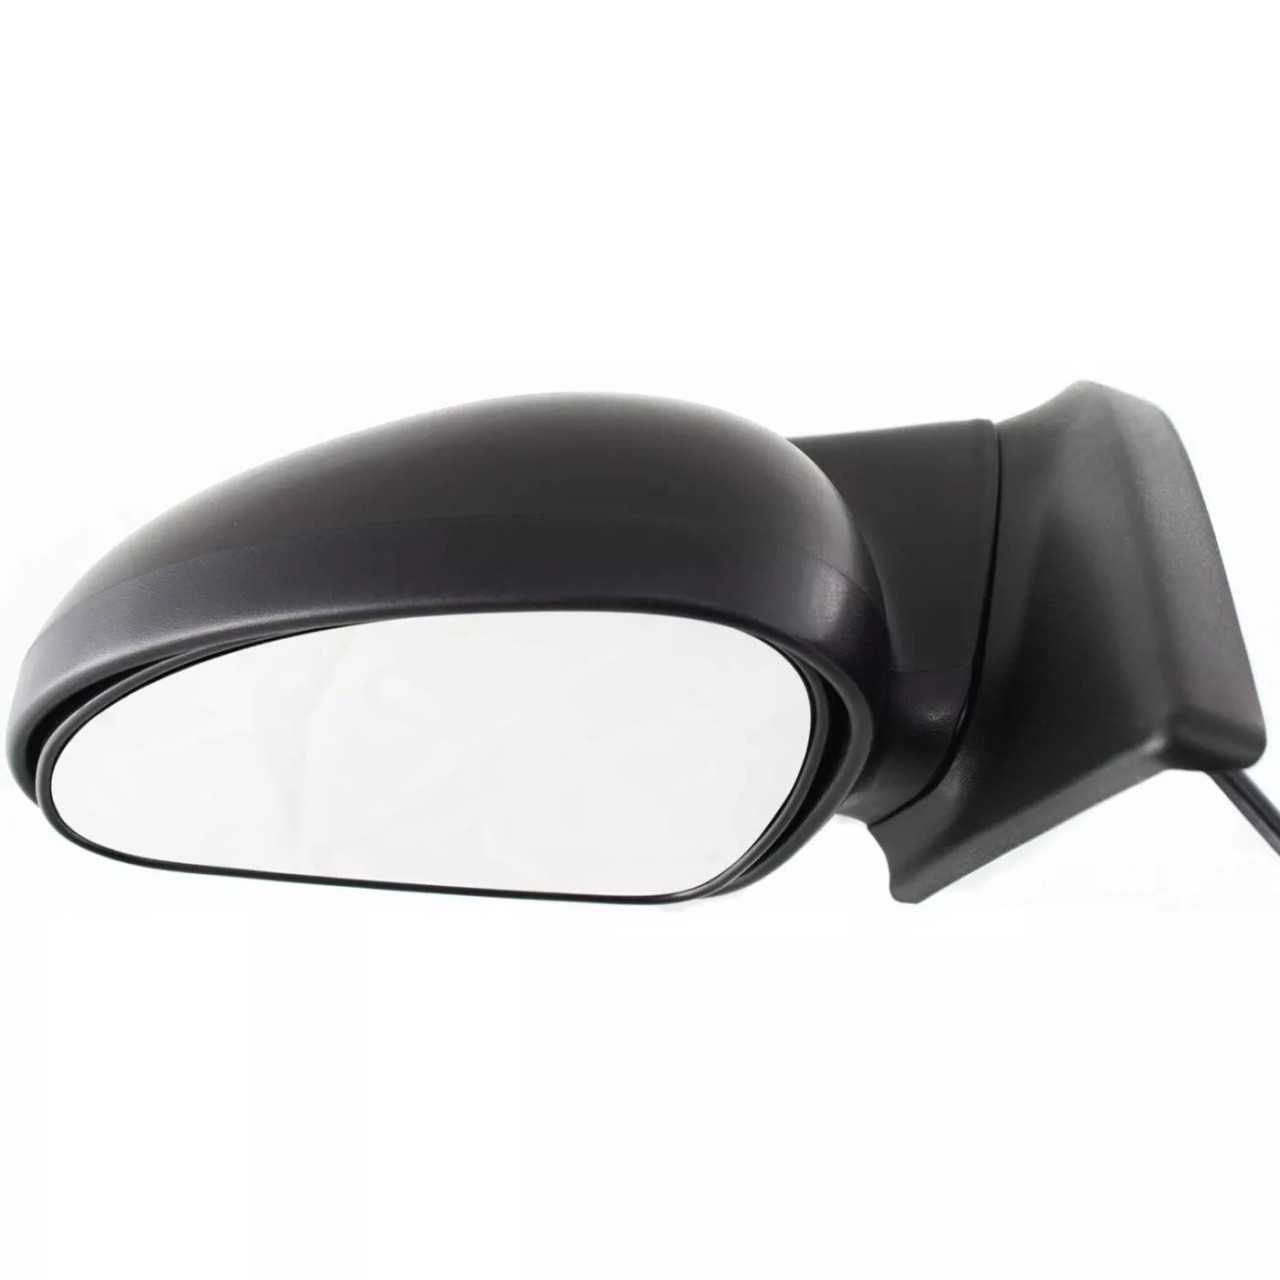 Power Mirror For 1998-2003 Ford Escort Coupe Models Front Driver Side Paintable